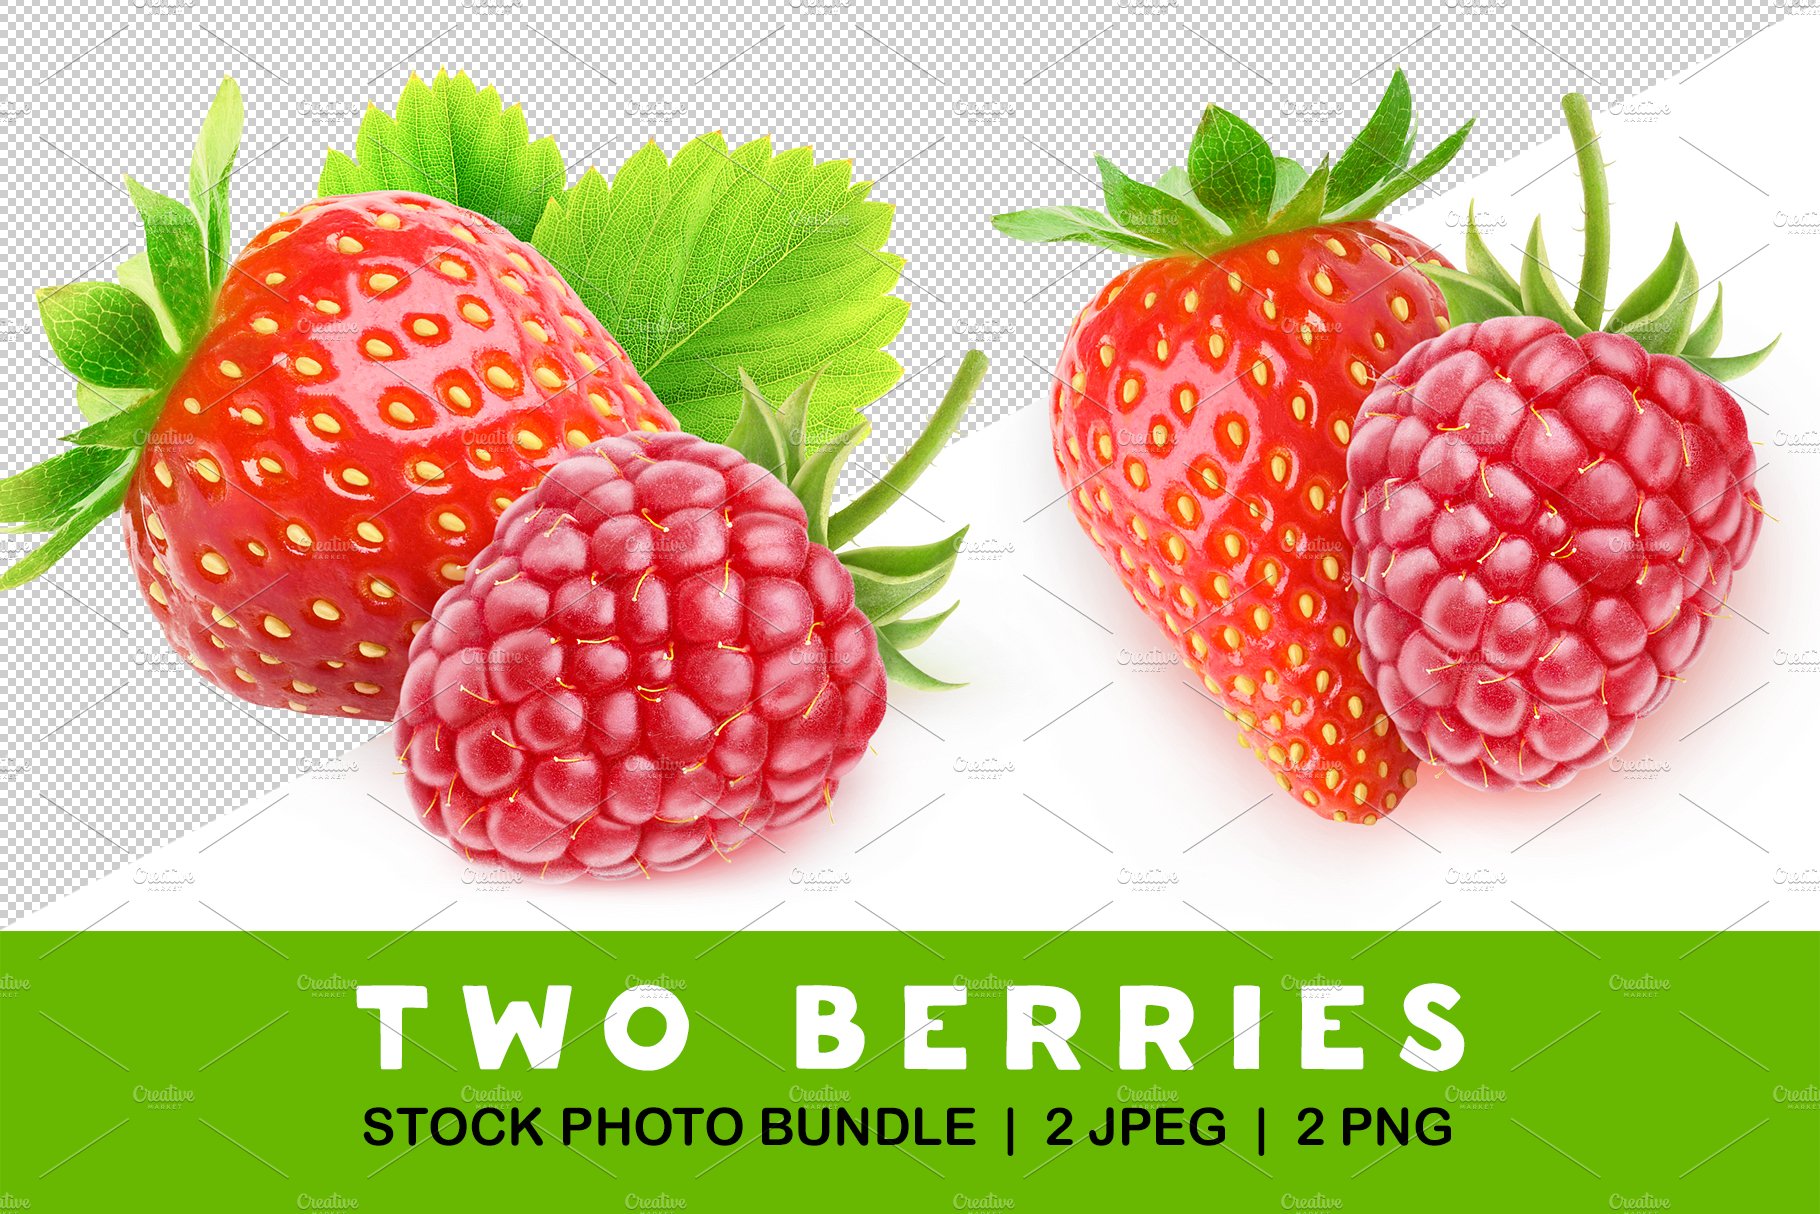 Strawberry and raspberry cover image.